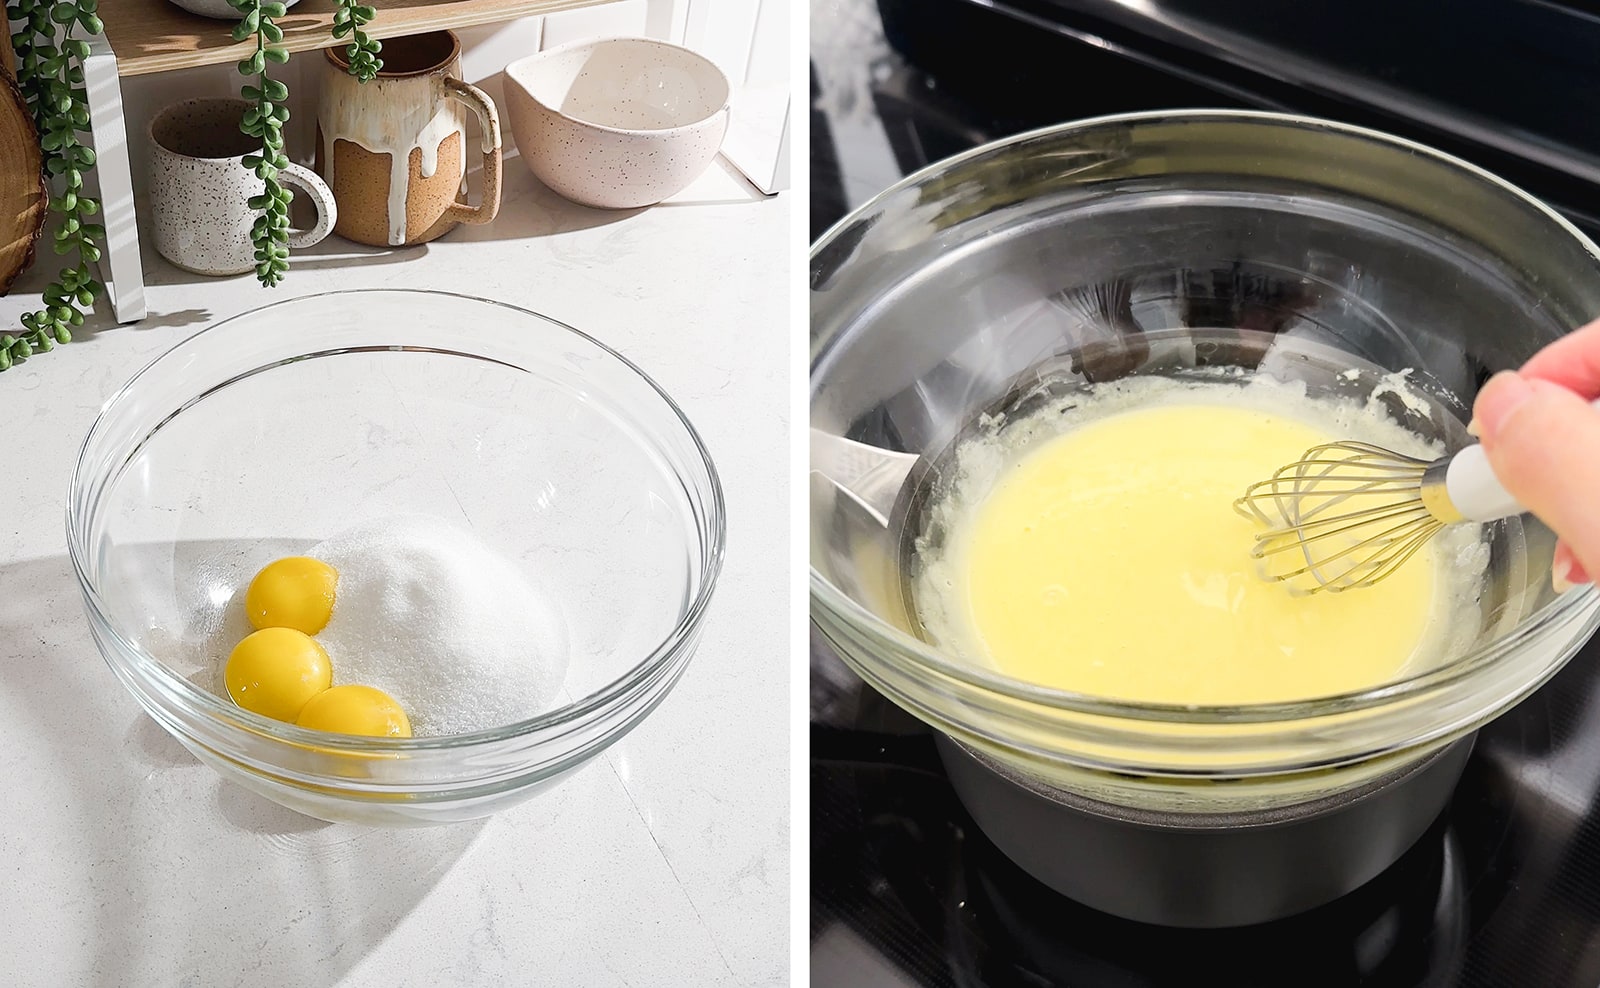 Left to right: Egg and sugar in a bowl, whisking eggs in double boiler.